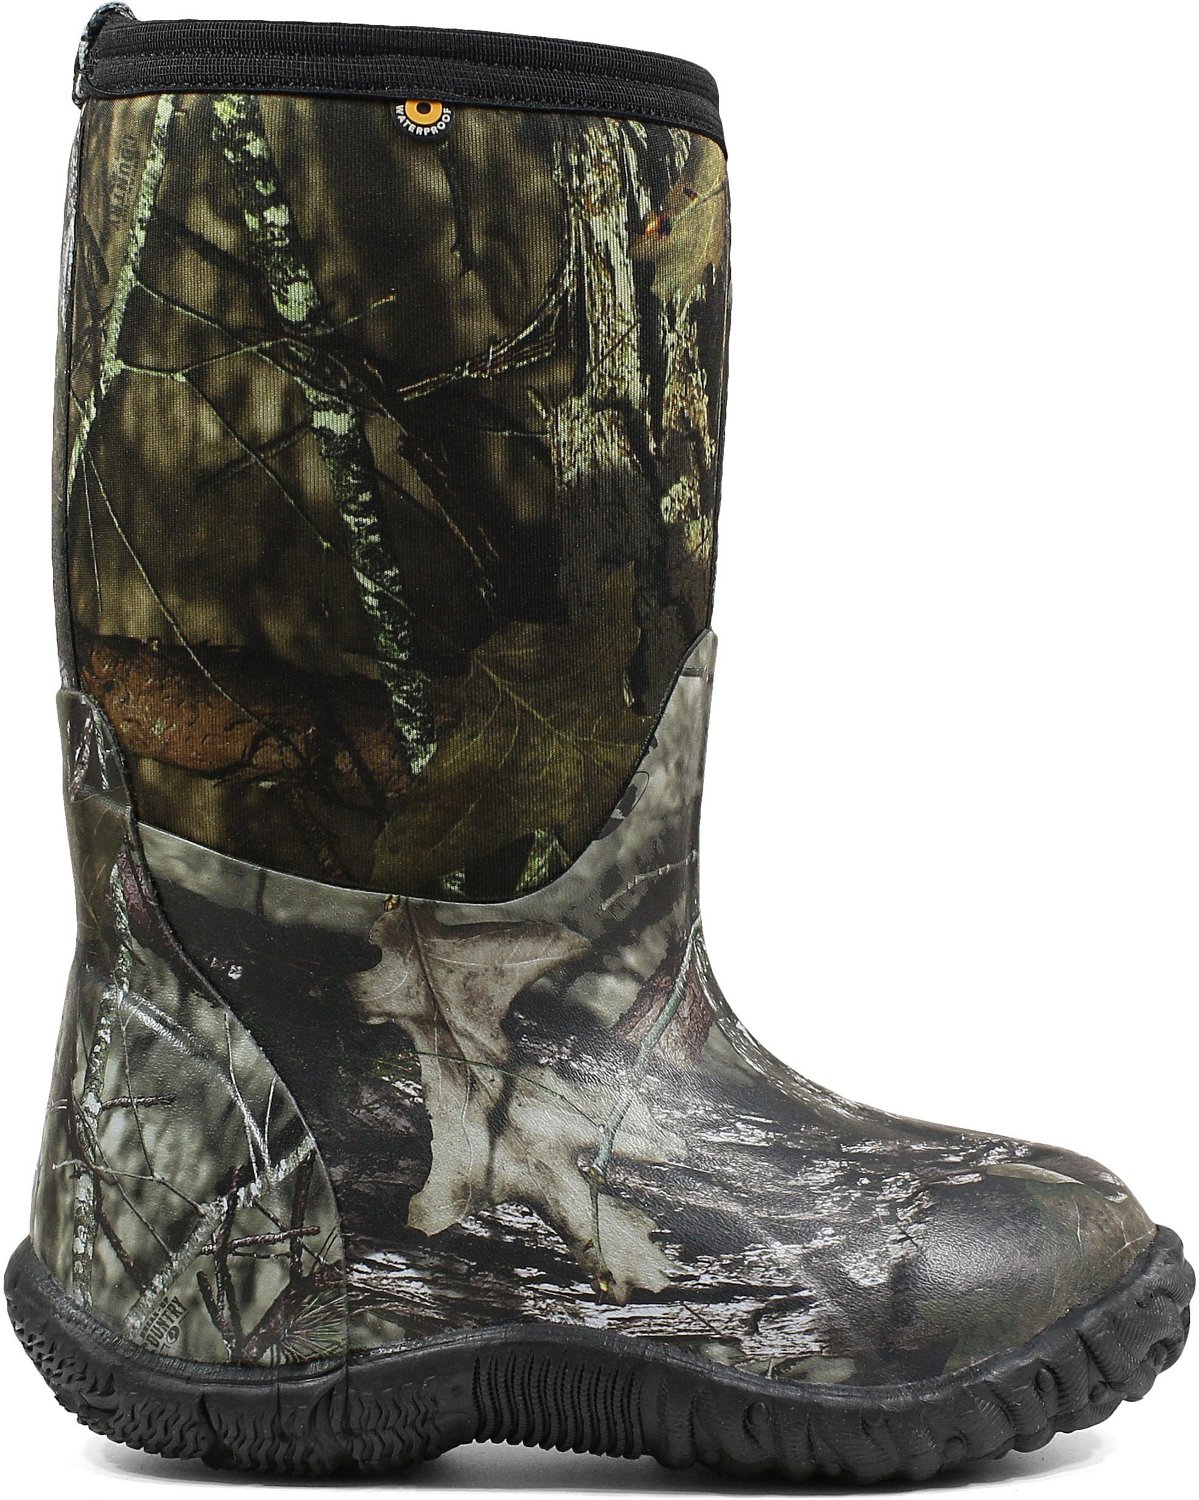 Bogs Kids' Classic II Mossy Oak Boots | Free Shipping at Academy